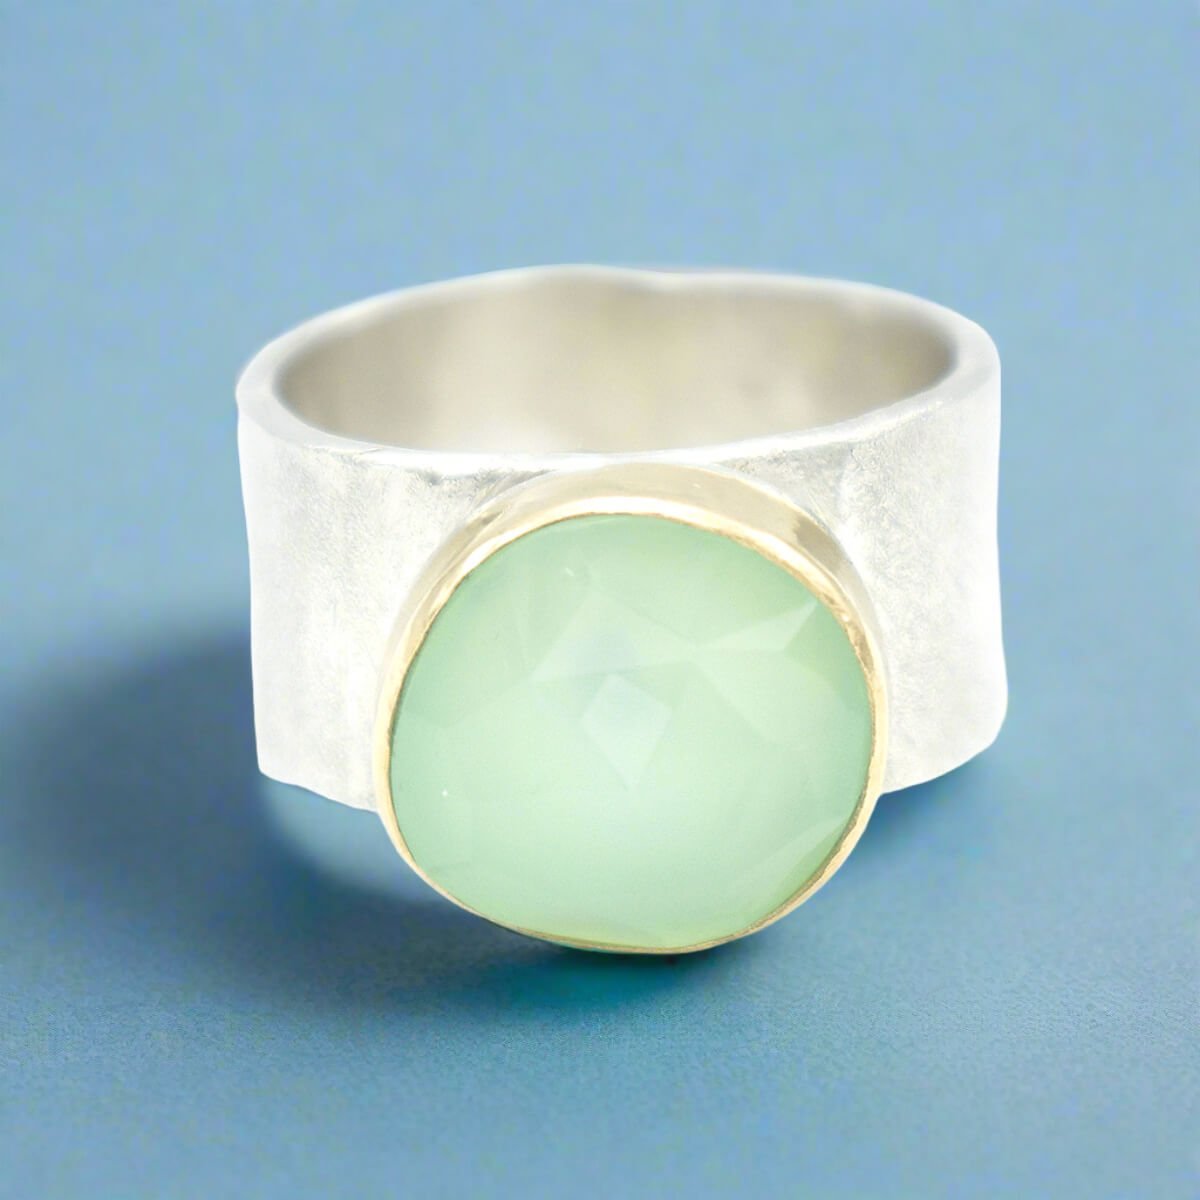 Faceted Aqua Chalcedony Ring - Rings